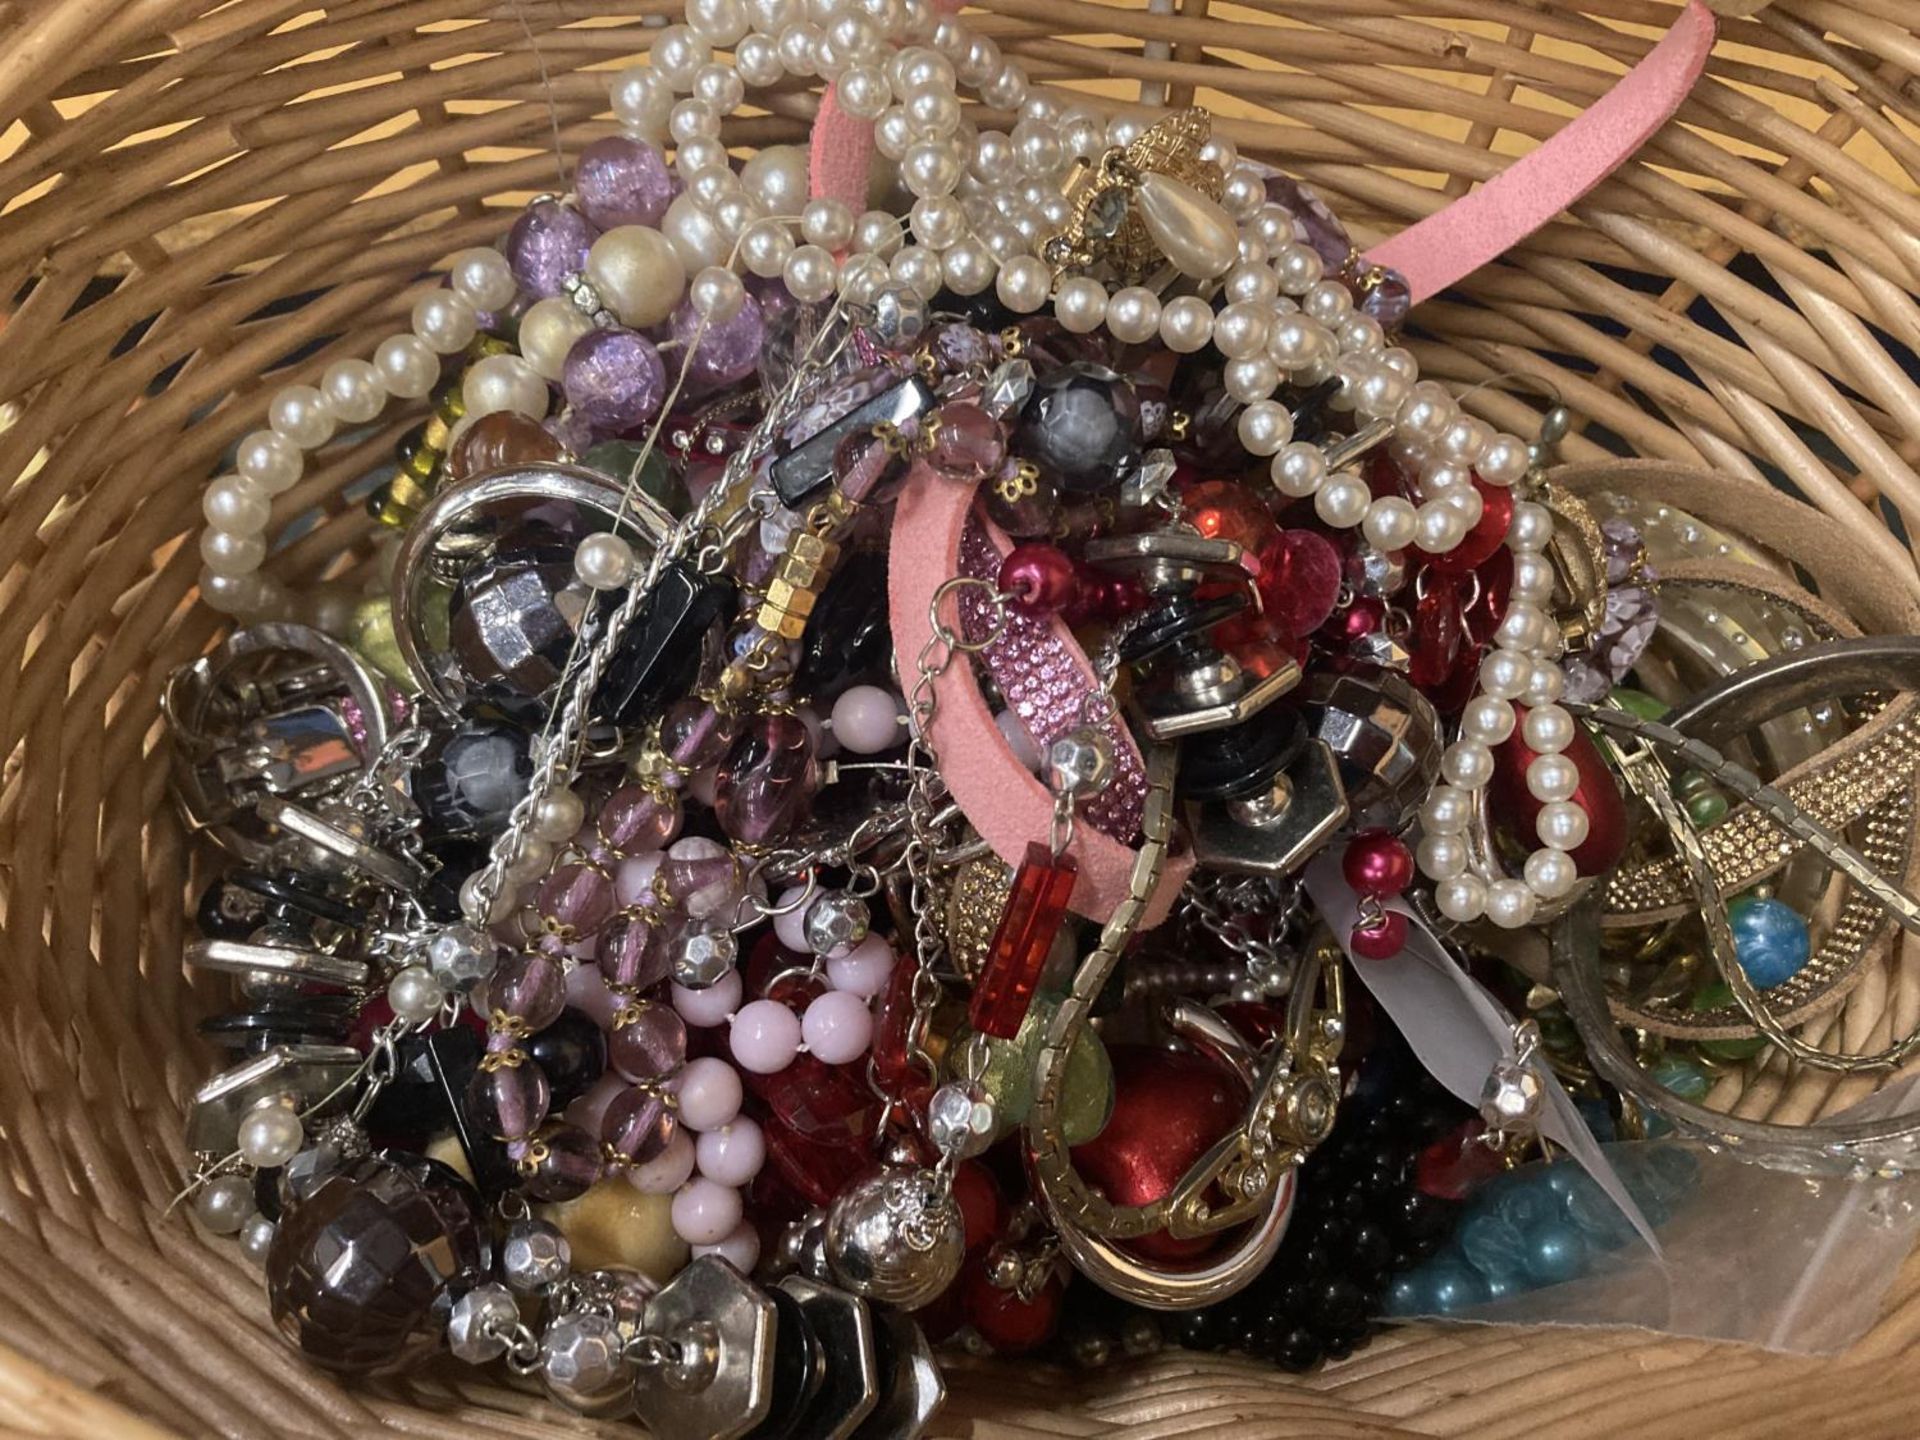 A QUANTITY OF COSTUME JEWELLERY TO INCLUDE BEADS, BANGLES, ETC - Image 3 of 3